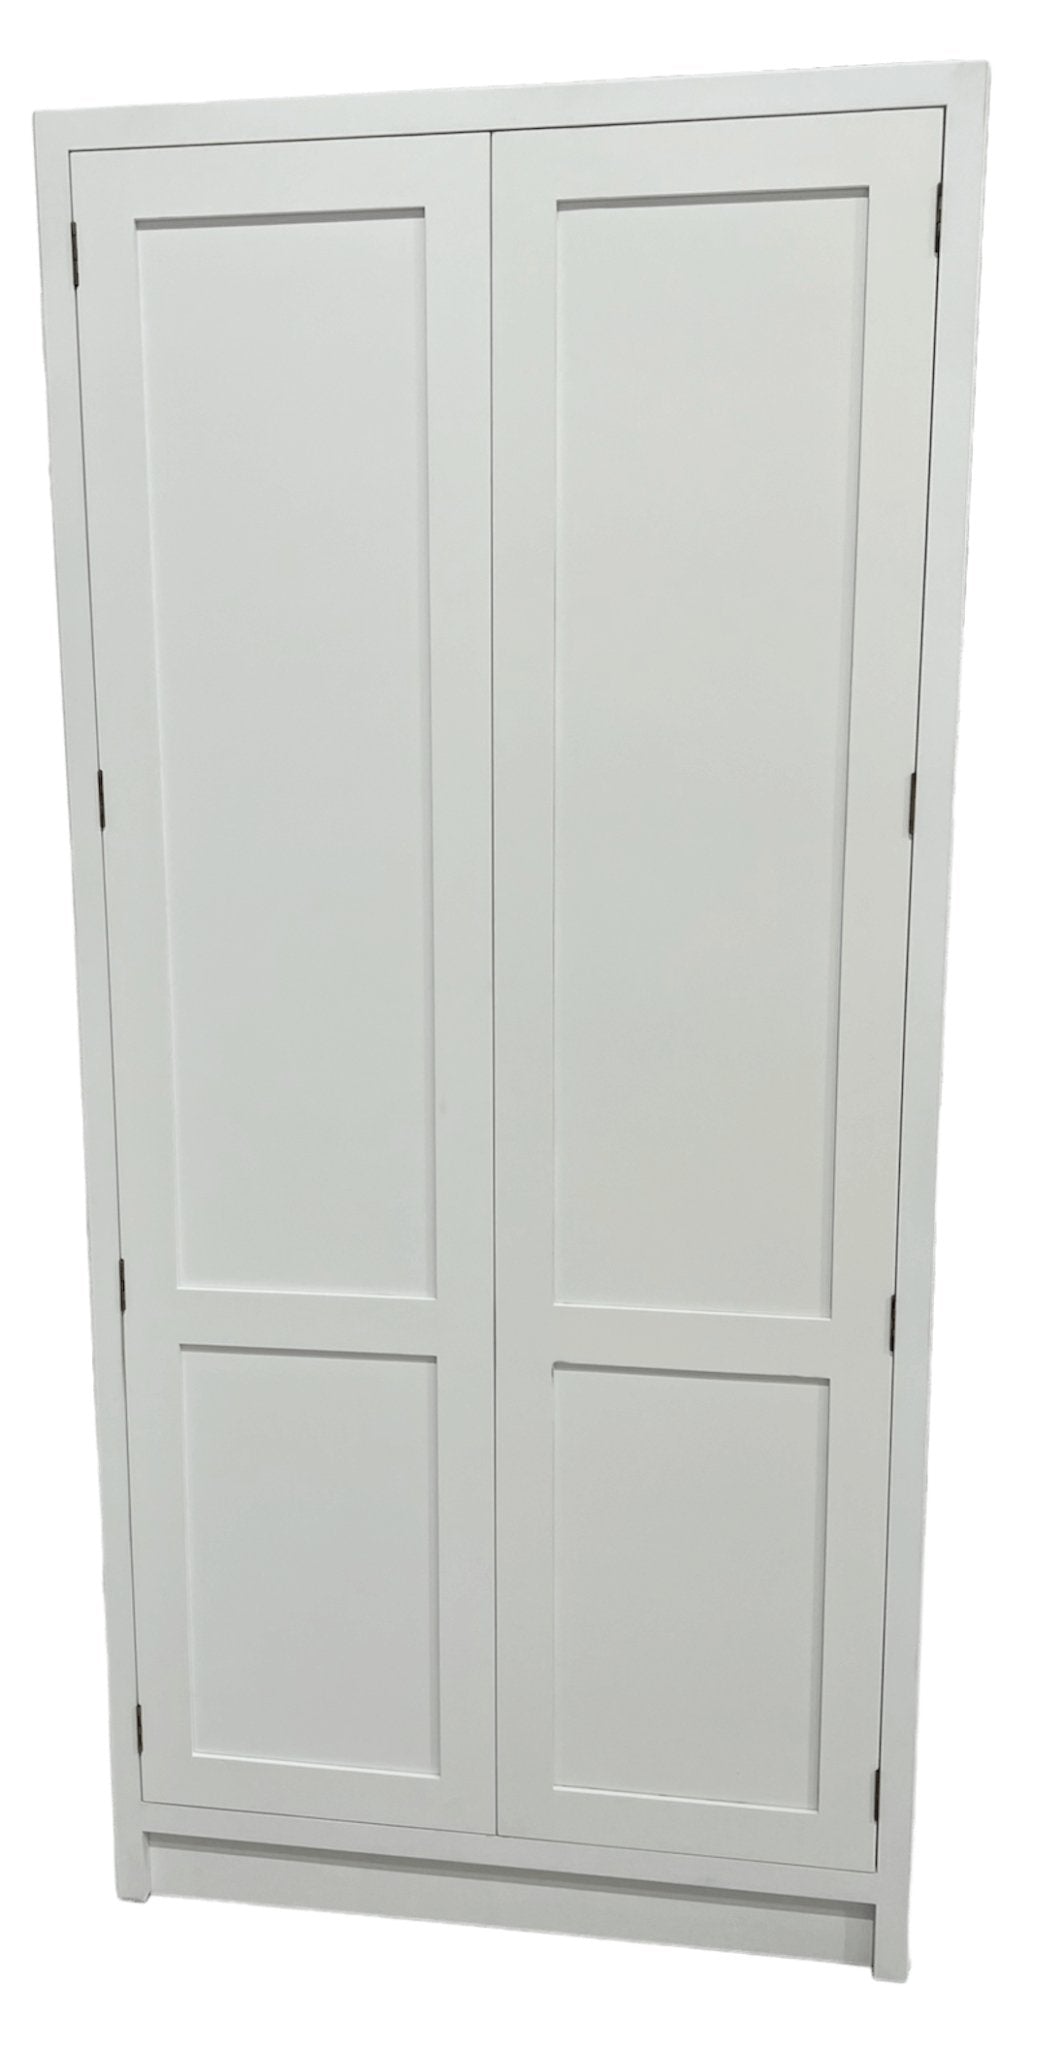 TL 900 - 900mm Wide Tall double door Larder - Classic Kitchens Direct